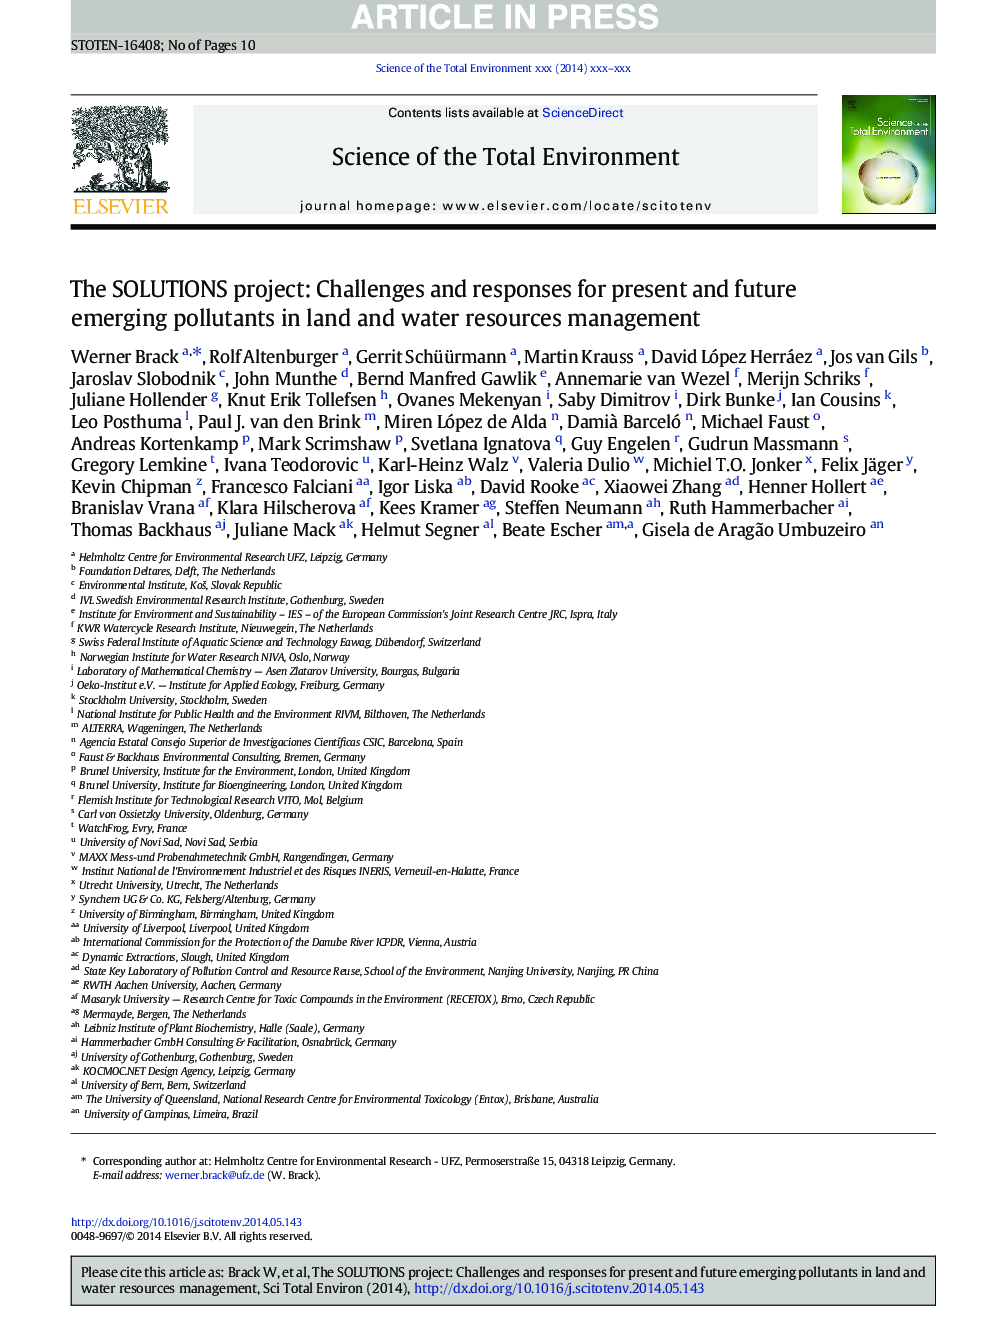 The SOLUTIONS project: Challenges and responses for present and future emerging pollutants in land and water resources management